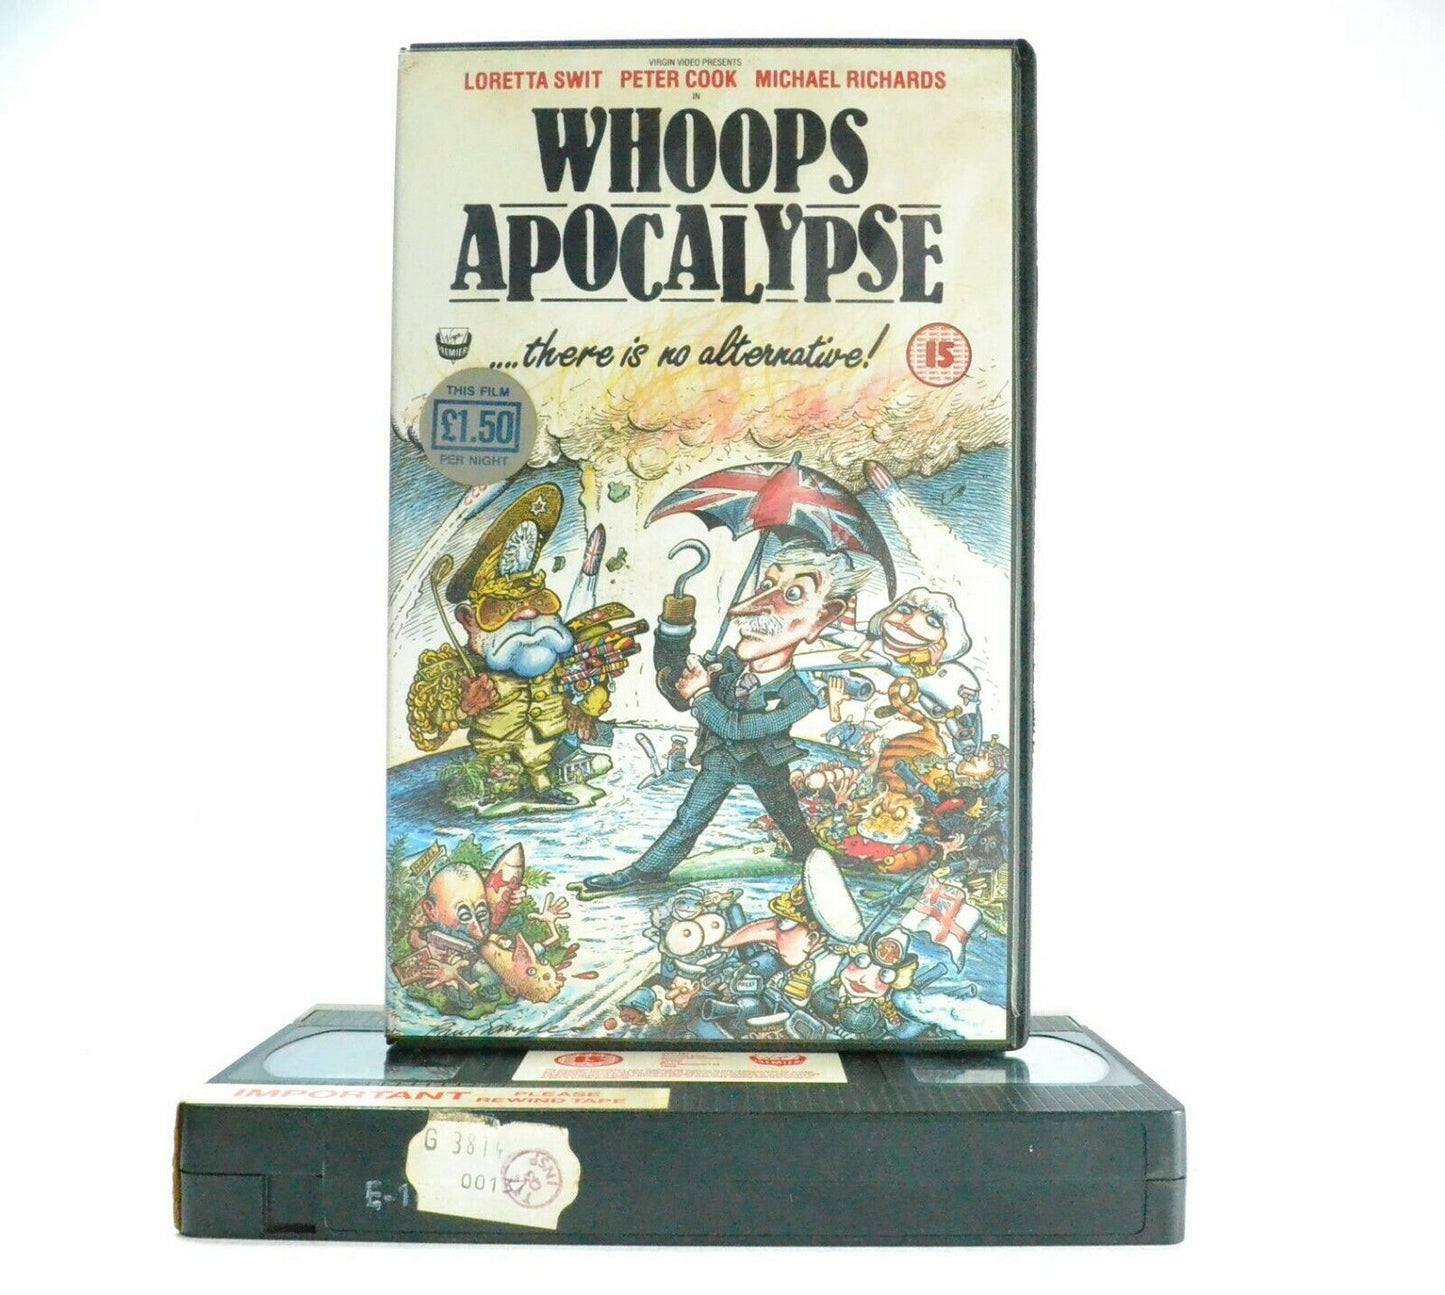 Whoops Apocalypse: Comedy Classic (1986) - Large Box - Ex-Rental - L.Swit - VHS-